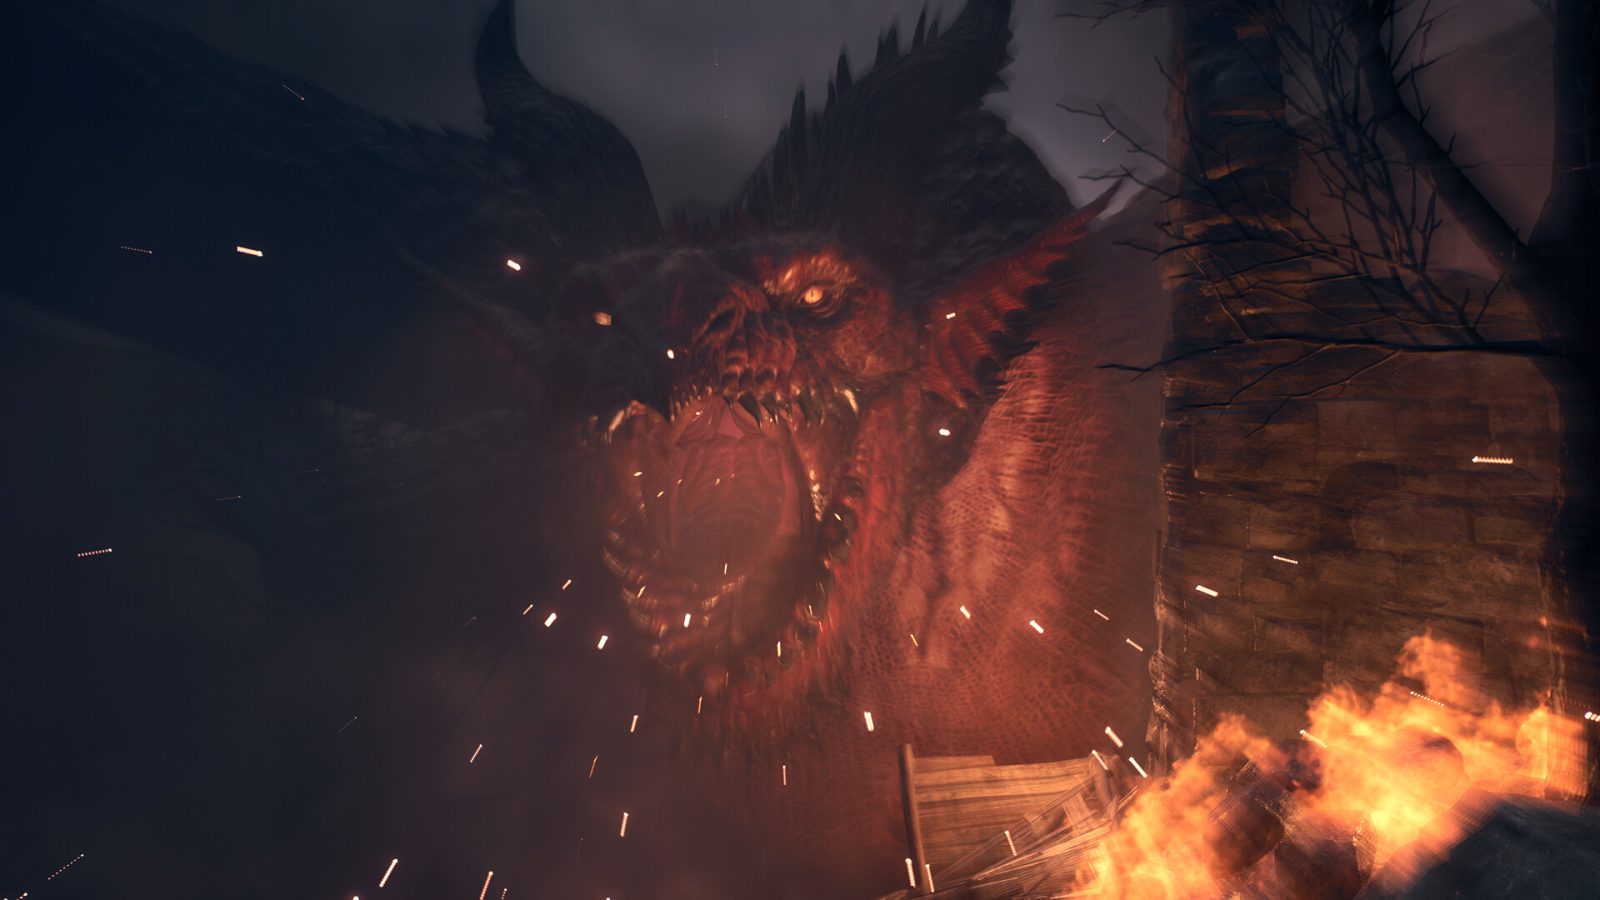 Dragon's Dogma 2 Deluxe Edition and Pre-Order Bonuses Revealed